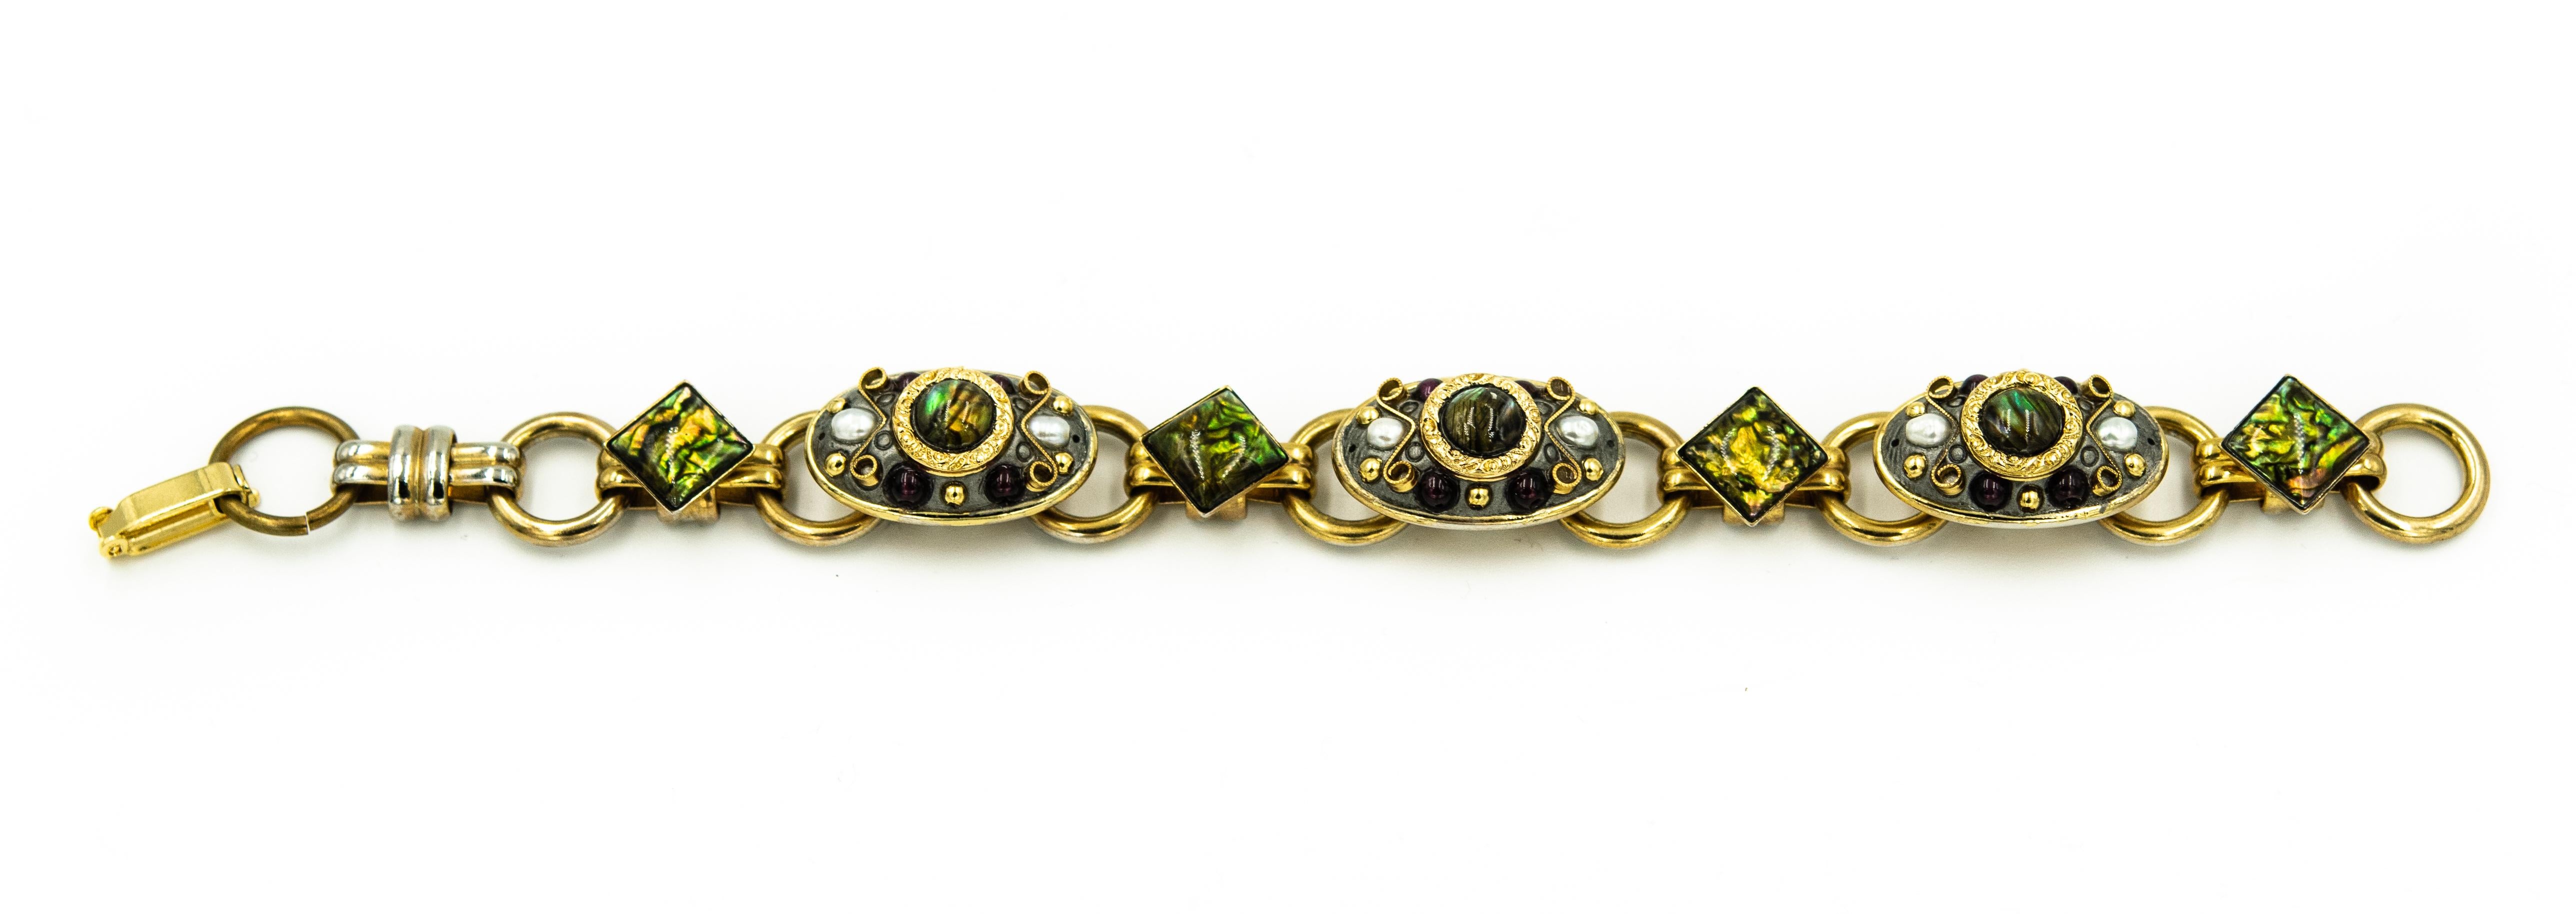 A beautiful Michal Golan bracelet and  brooch pendant set includes:   A gold plated brooch is which is adorned with seed pearls, abalone, green glass stones and beautiful filigree heart designs. Very high quality and versatile piece of jewelry art